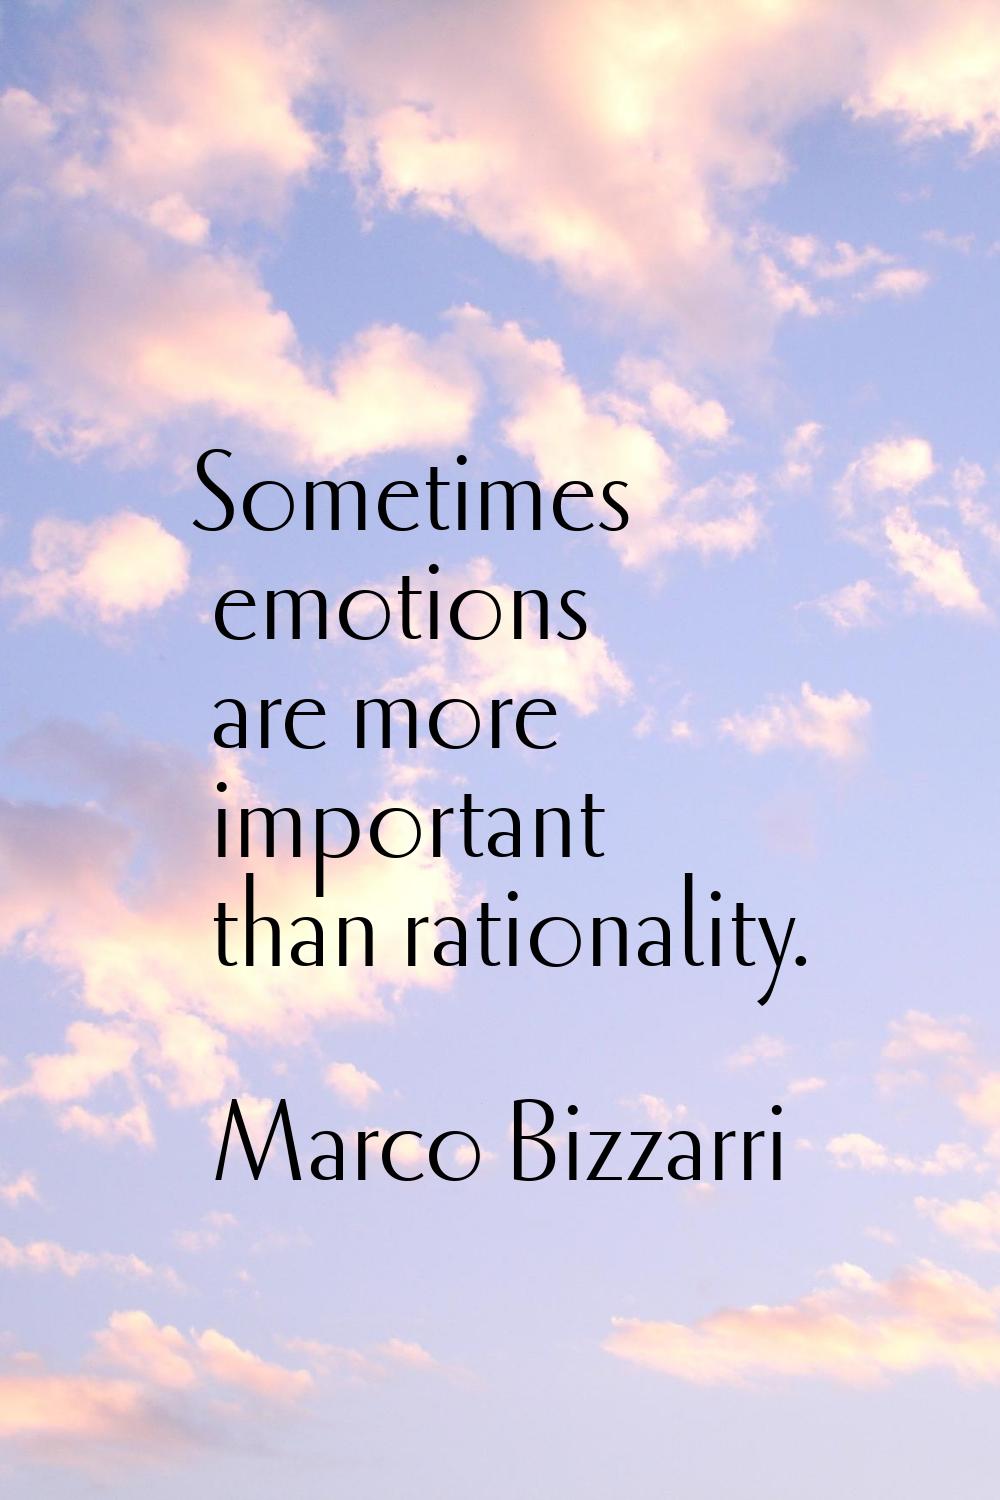 Sometimes emotions are more important than rationality.